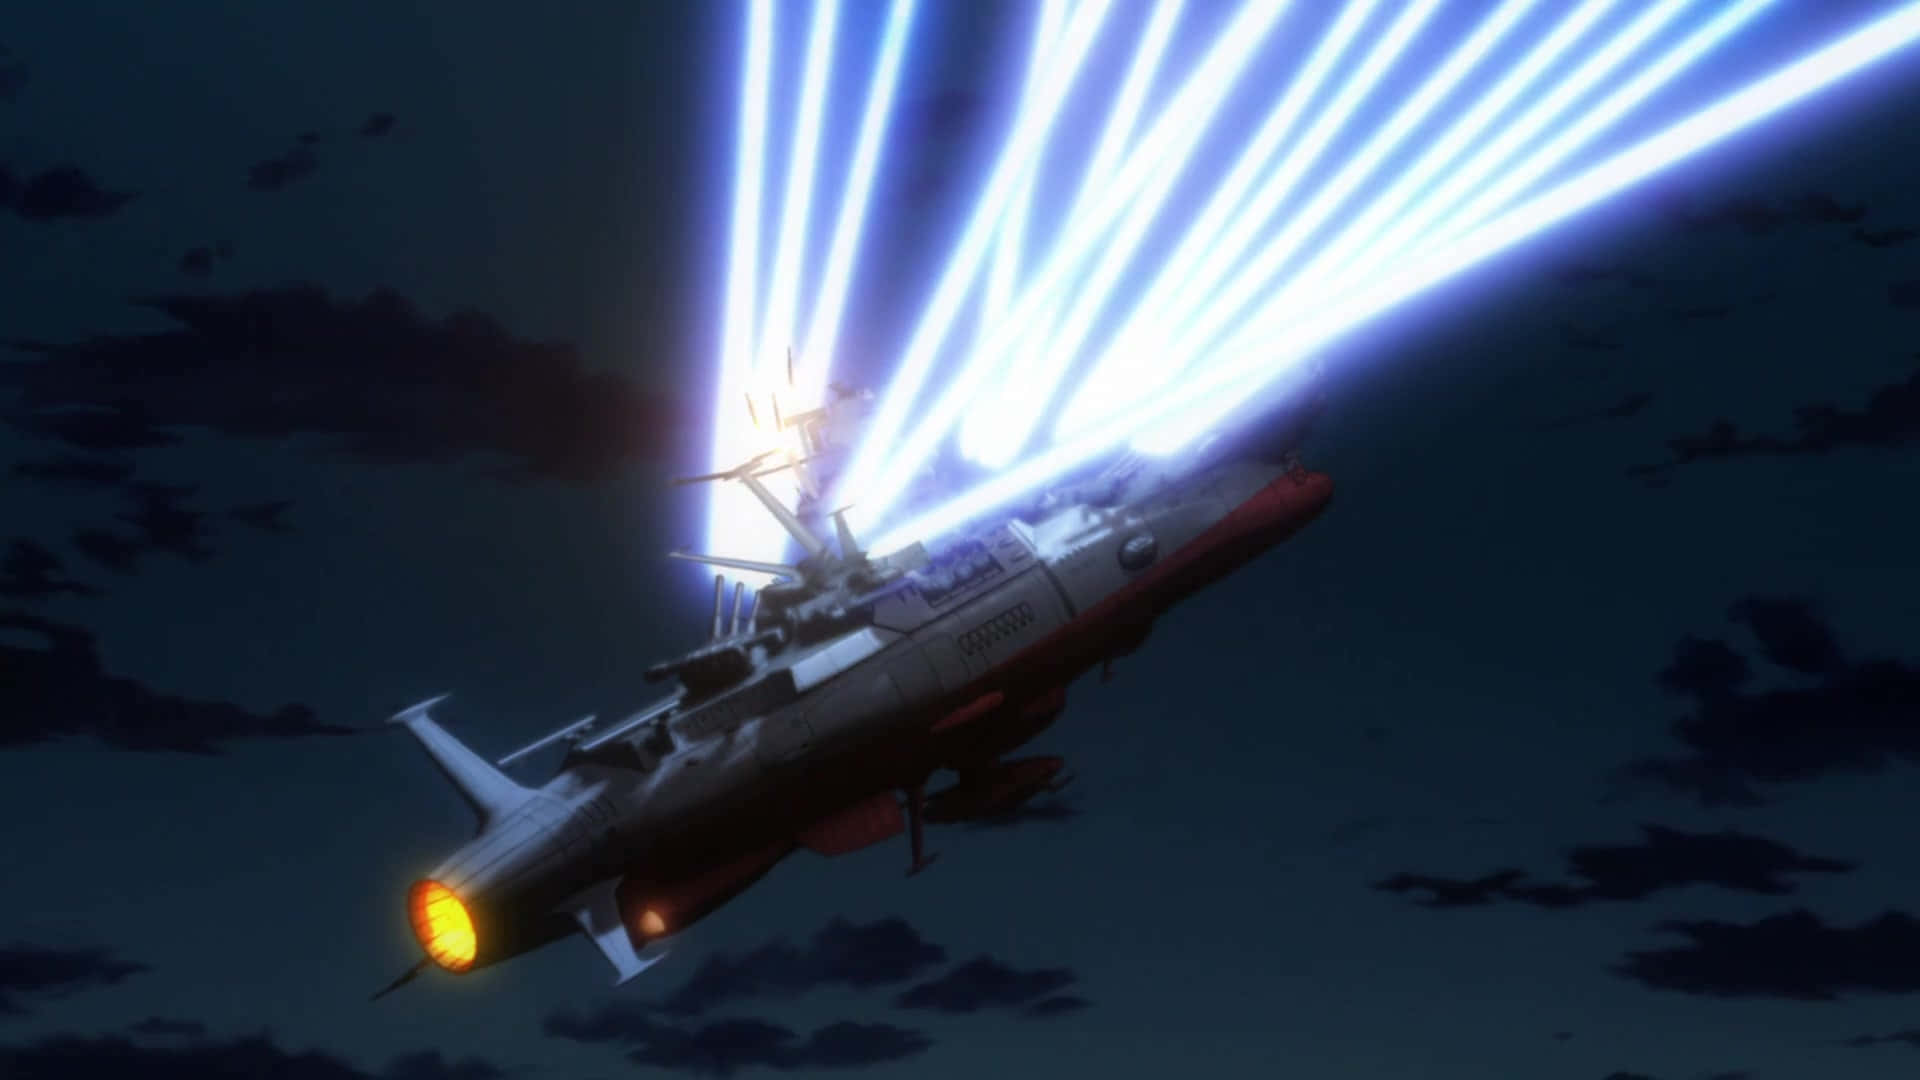 Uncover the mysteries of the universe with Space Battleship Yamato! Wallpaper